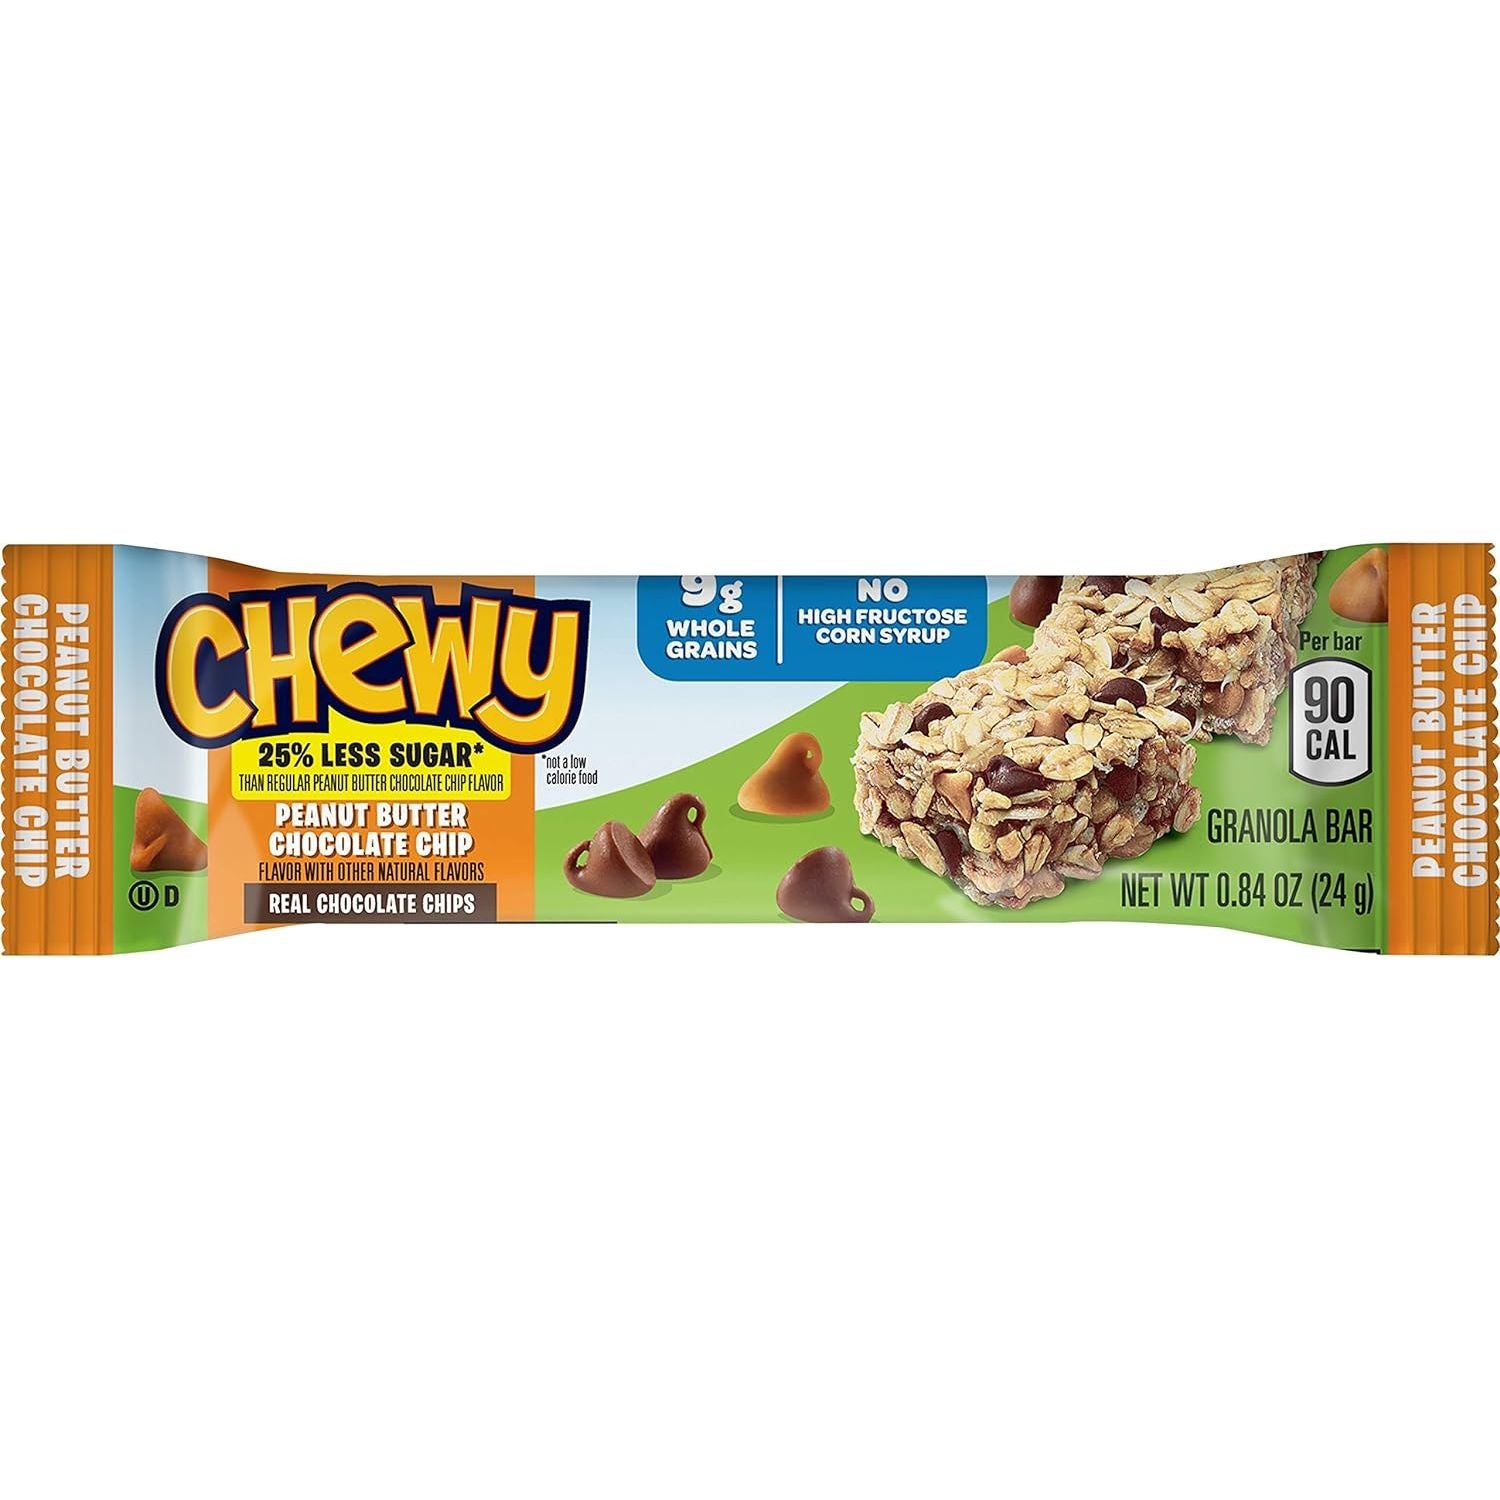 Quaker Chewy Granola Bars, Peanut Butter Chocolate Chip - 8 count (24g per pack)